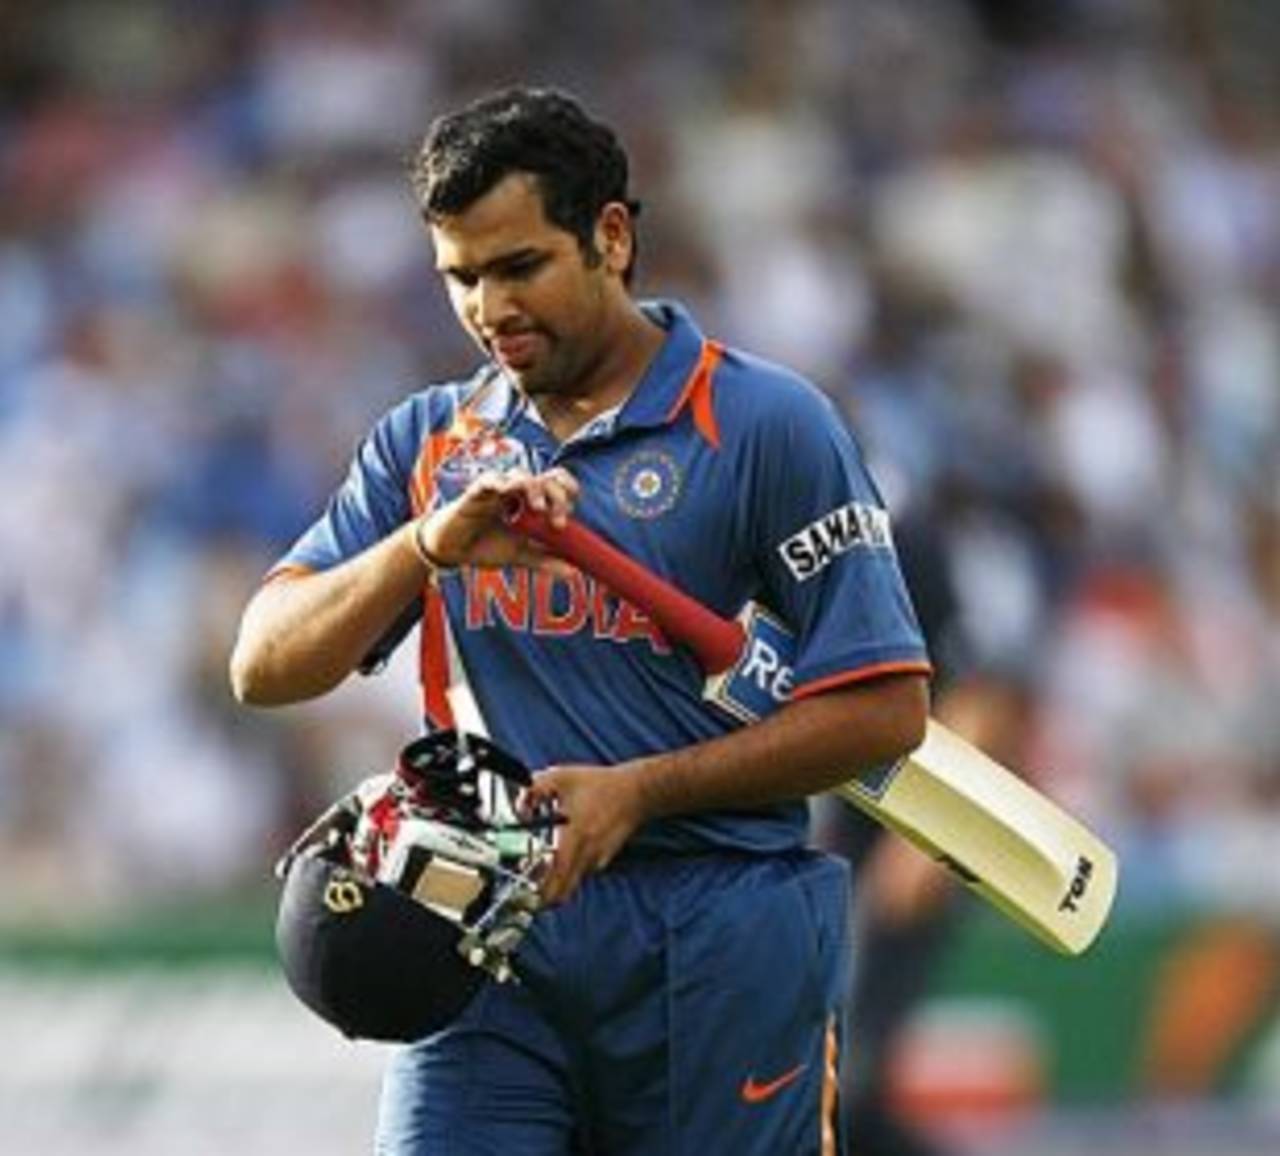 Rohit Sharma walks back after being dismissed for 9, England v India, ICC World Twenty20 Super Eights, Lord's, June 14, 2009